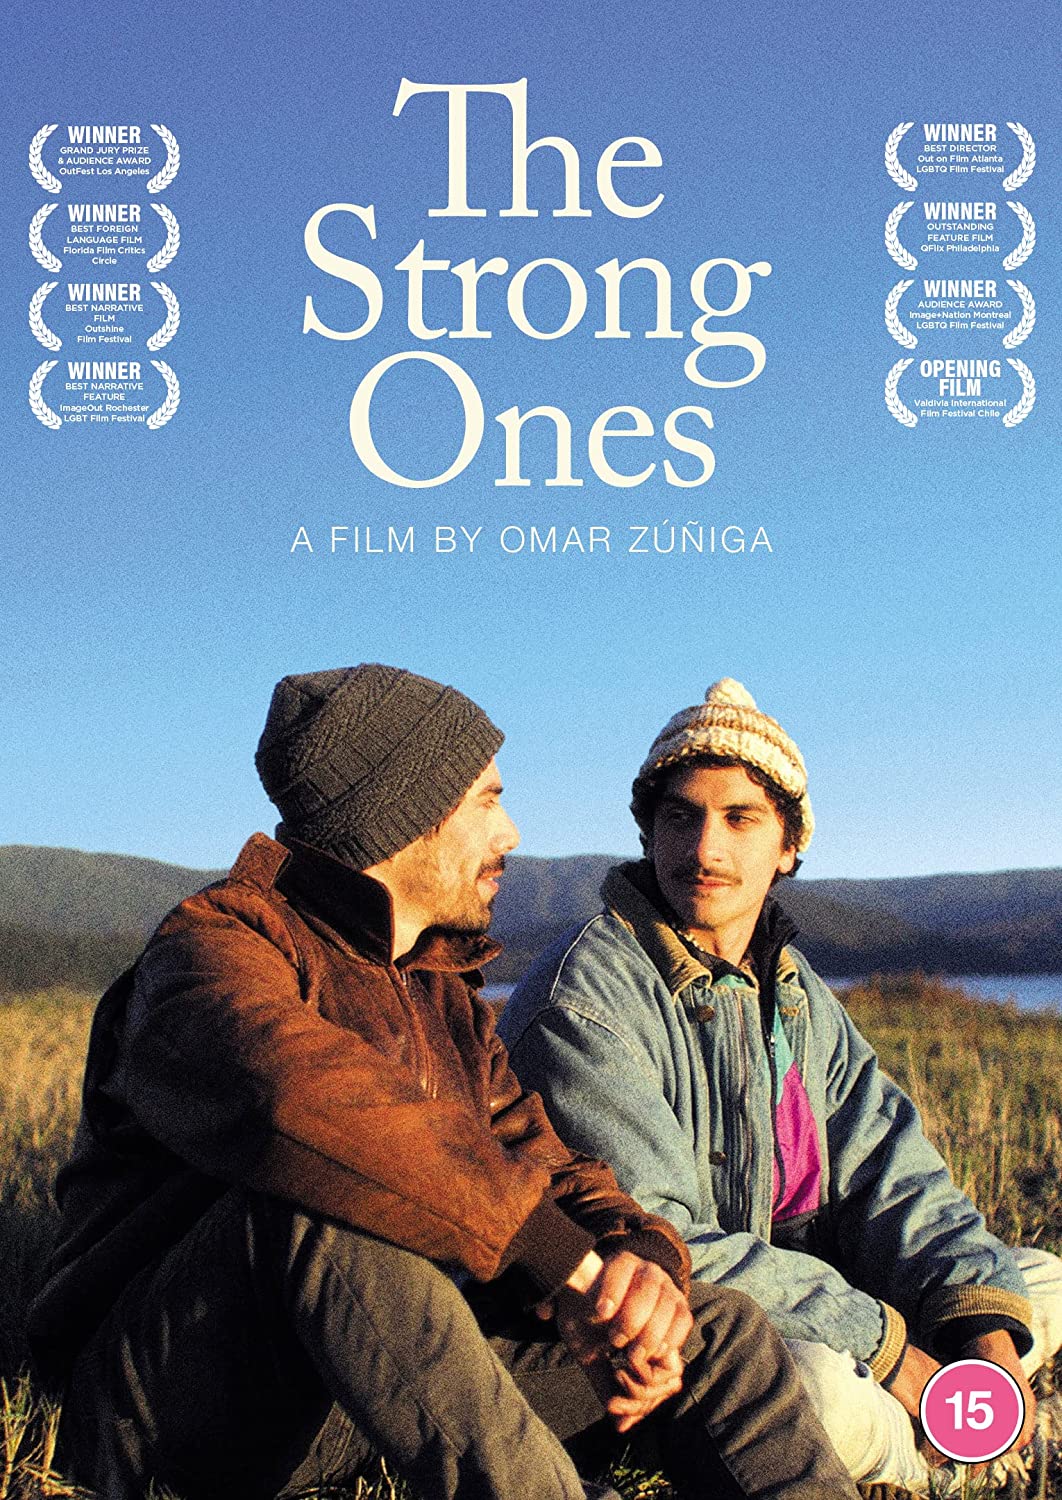 The Strong Ones - Drama [DVD]